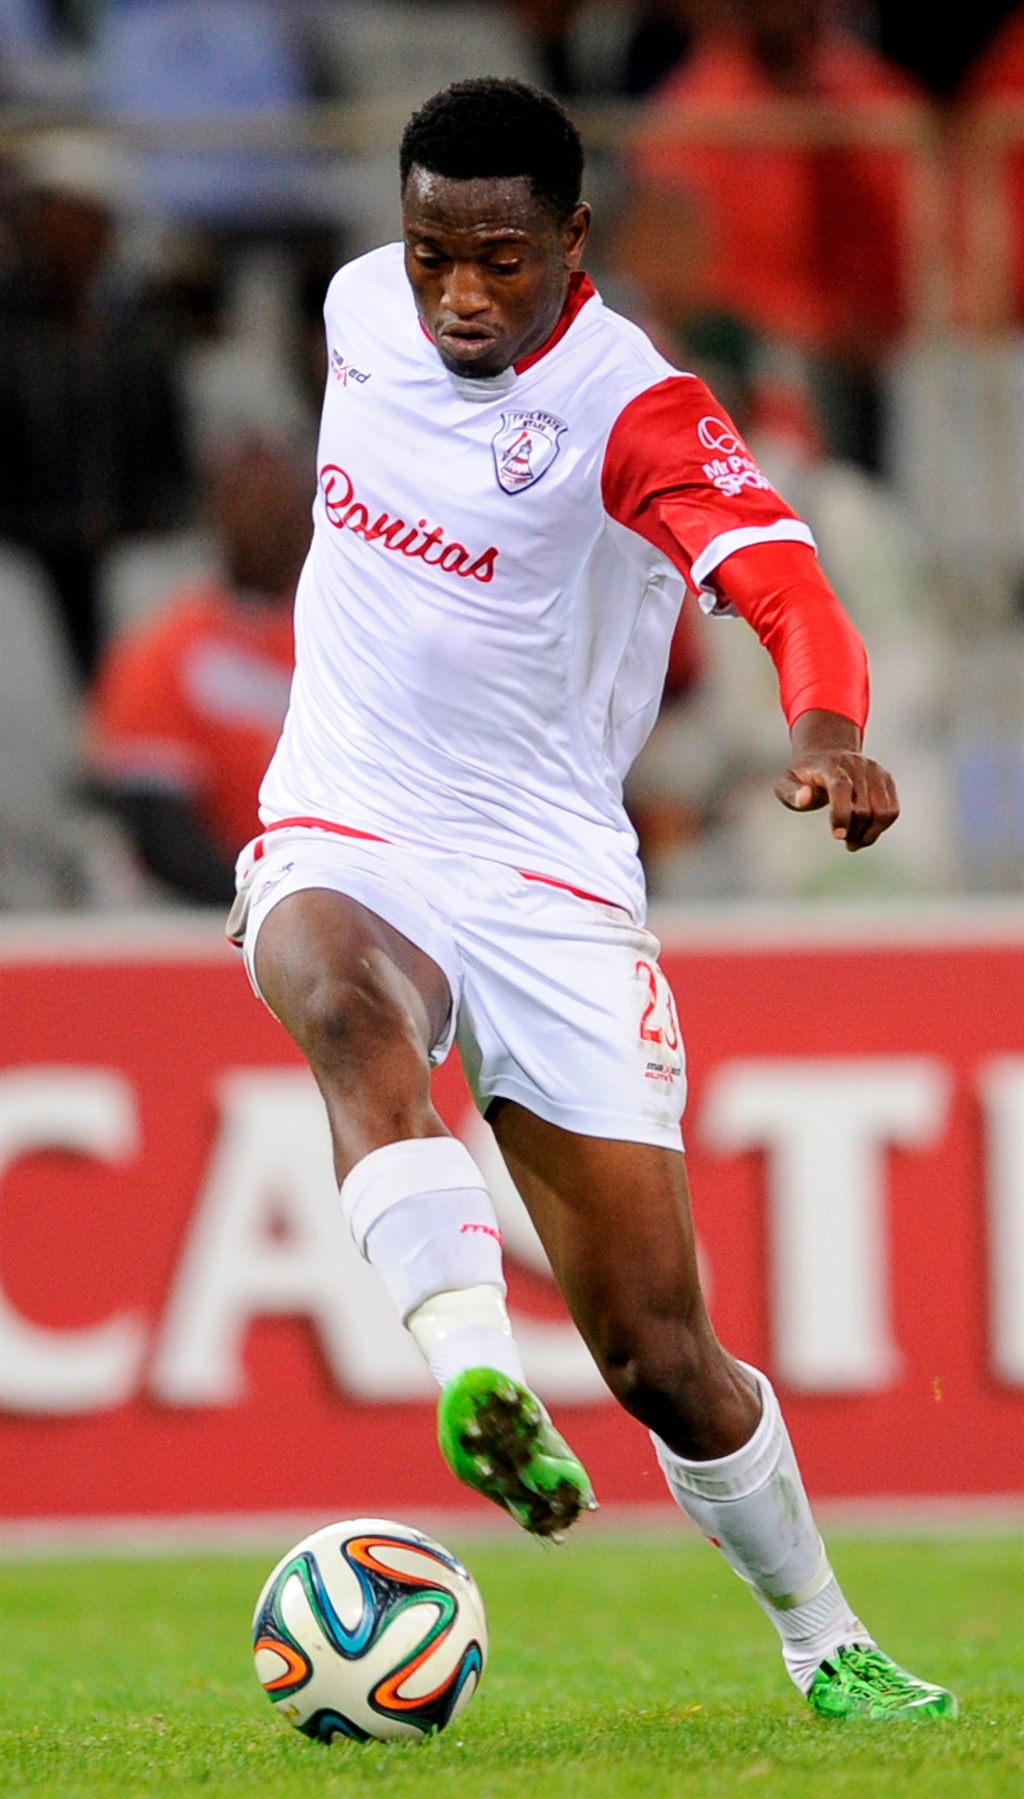 Highlands Park have signed striker Moeketsi Sekola from Free State Stars. Photo by Gallo Images